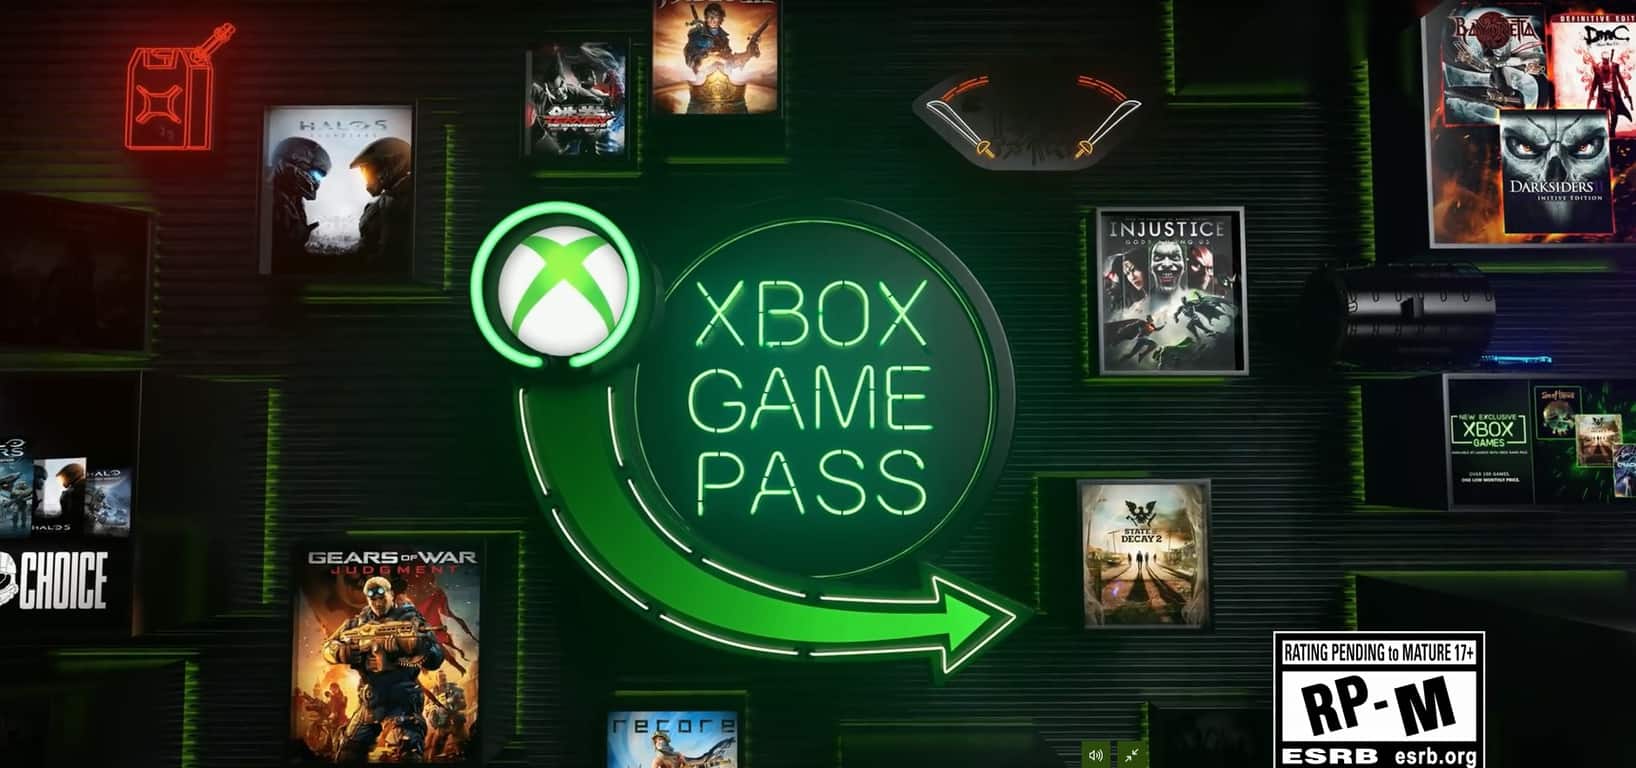 Xbox Game Pass starting to pay off as gaming revenue had best quarter ever - OnMSFT.com - January 31, 2019